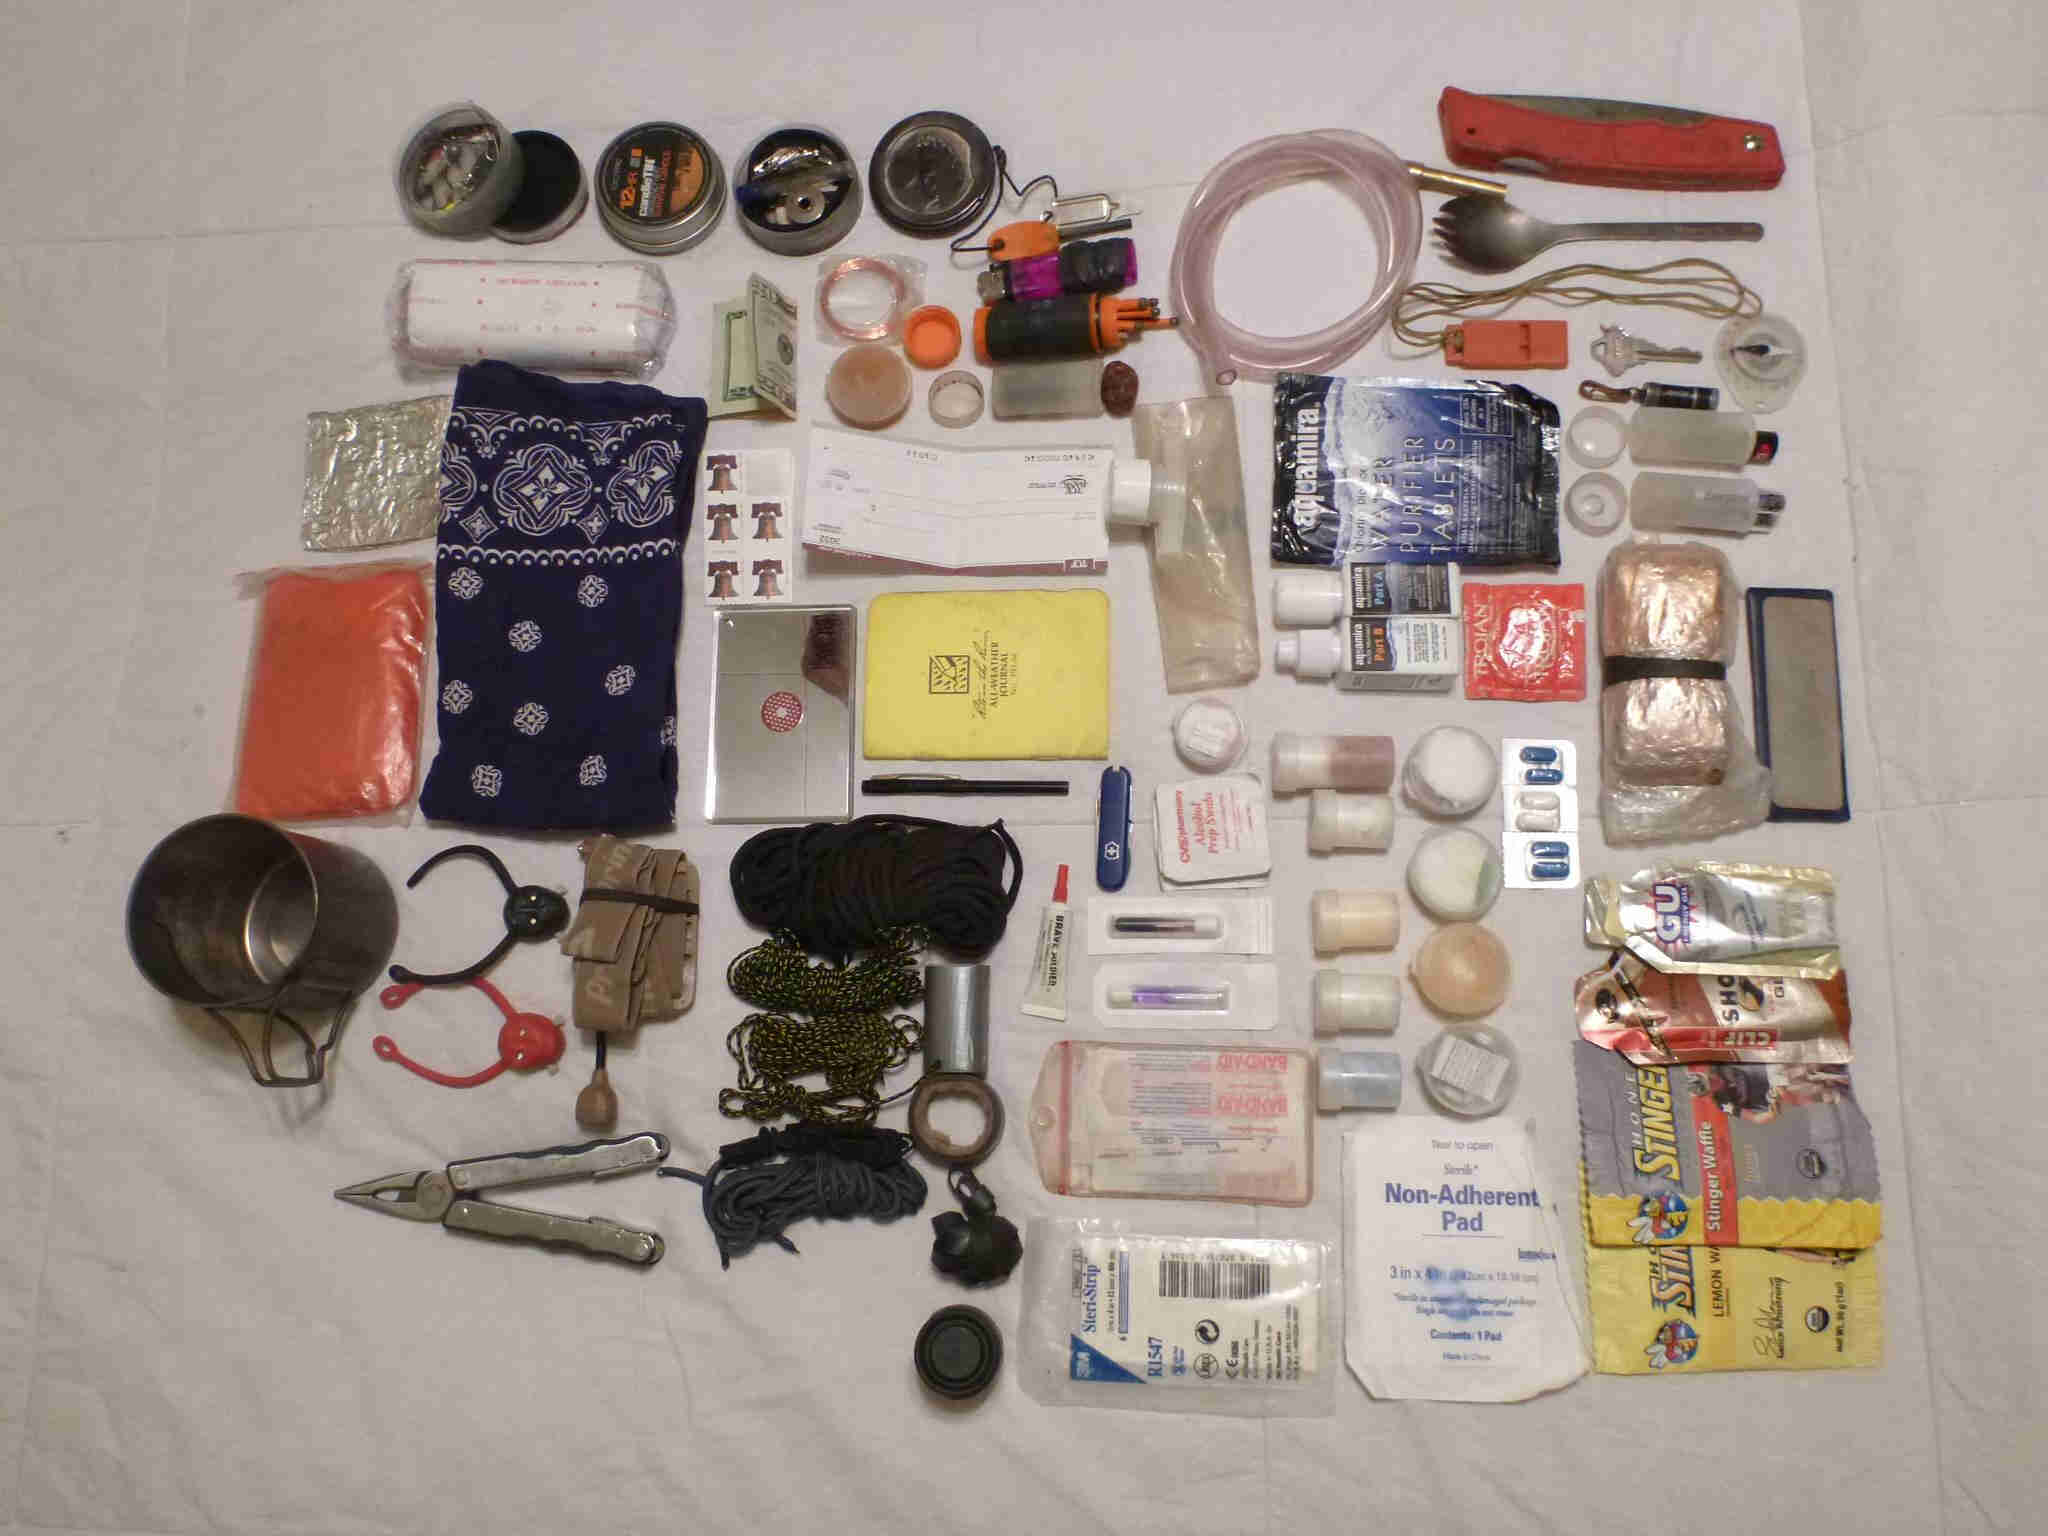 Downward view of all of the components from a person's survival kit, laid out on a flat white surface